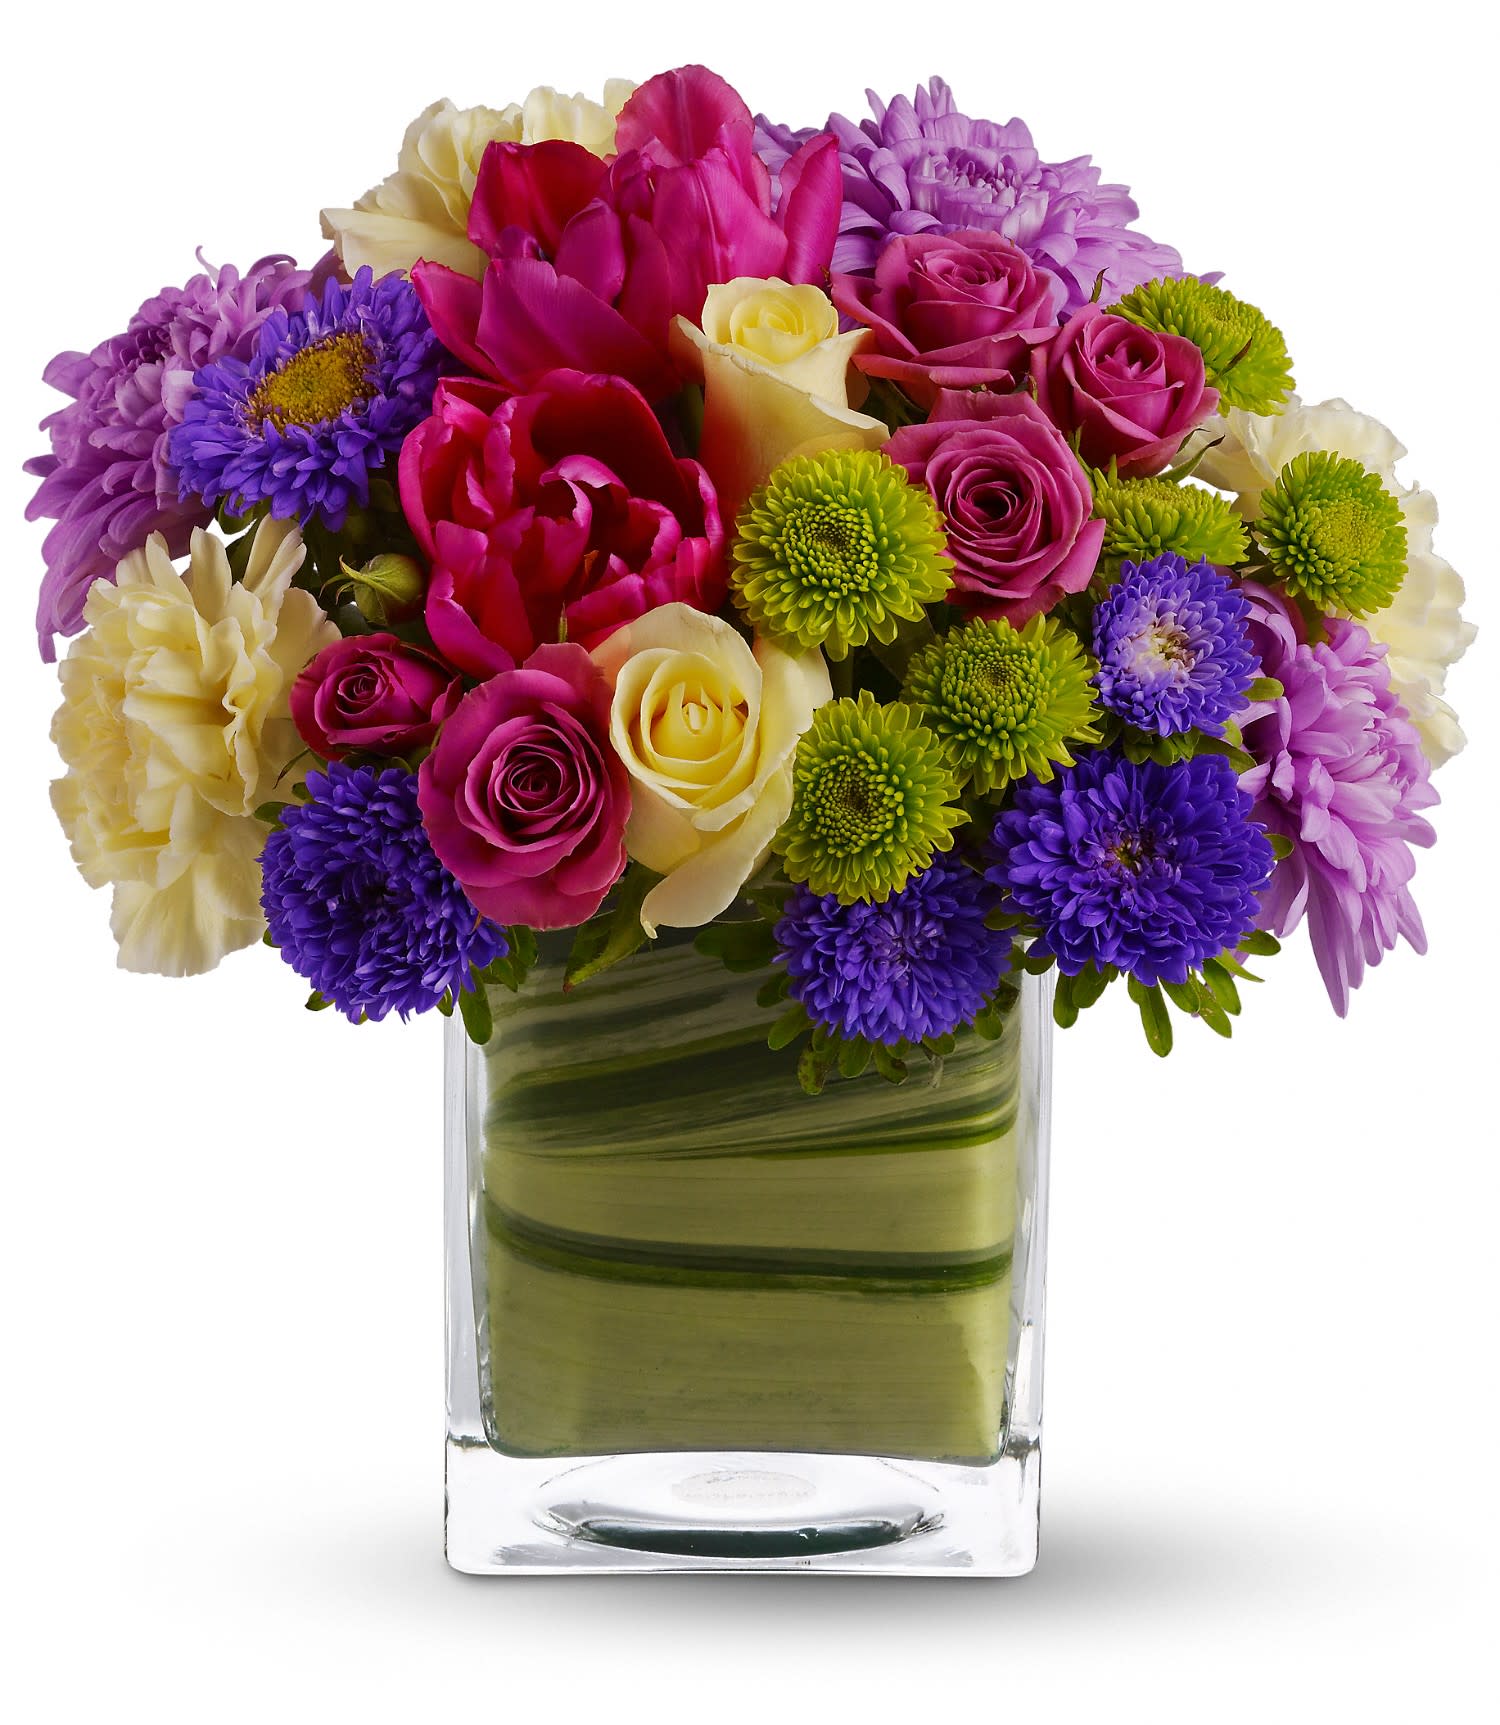  One Fine Day - Light yellow roses, hot pink spray roses, tulips and gerberas, yellow carnations, green button spray chrysanthemums and lavender cushion spray chrysanthemums are delivered in any vase. You'll have many fine days when you send this beautiful bouquet! Approximately 9 1/4&quot; W x 9 3/4&quot; H  T147-2A